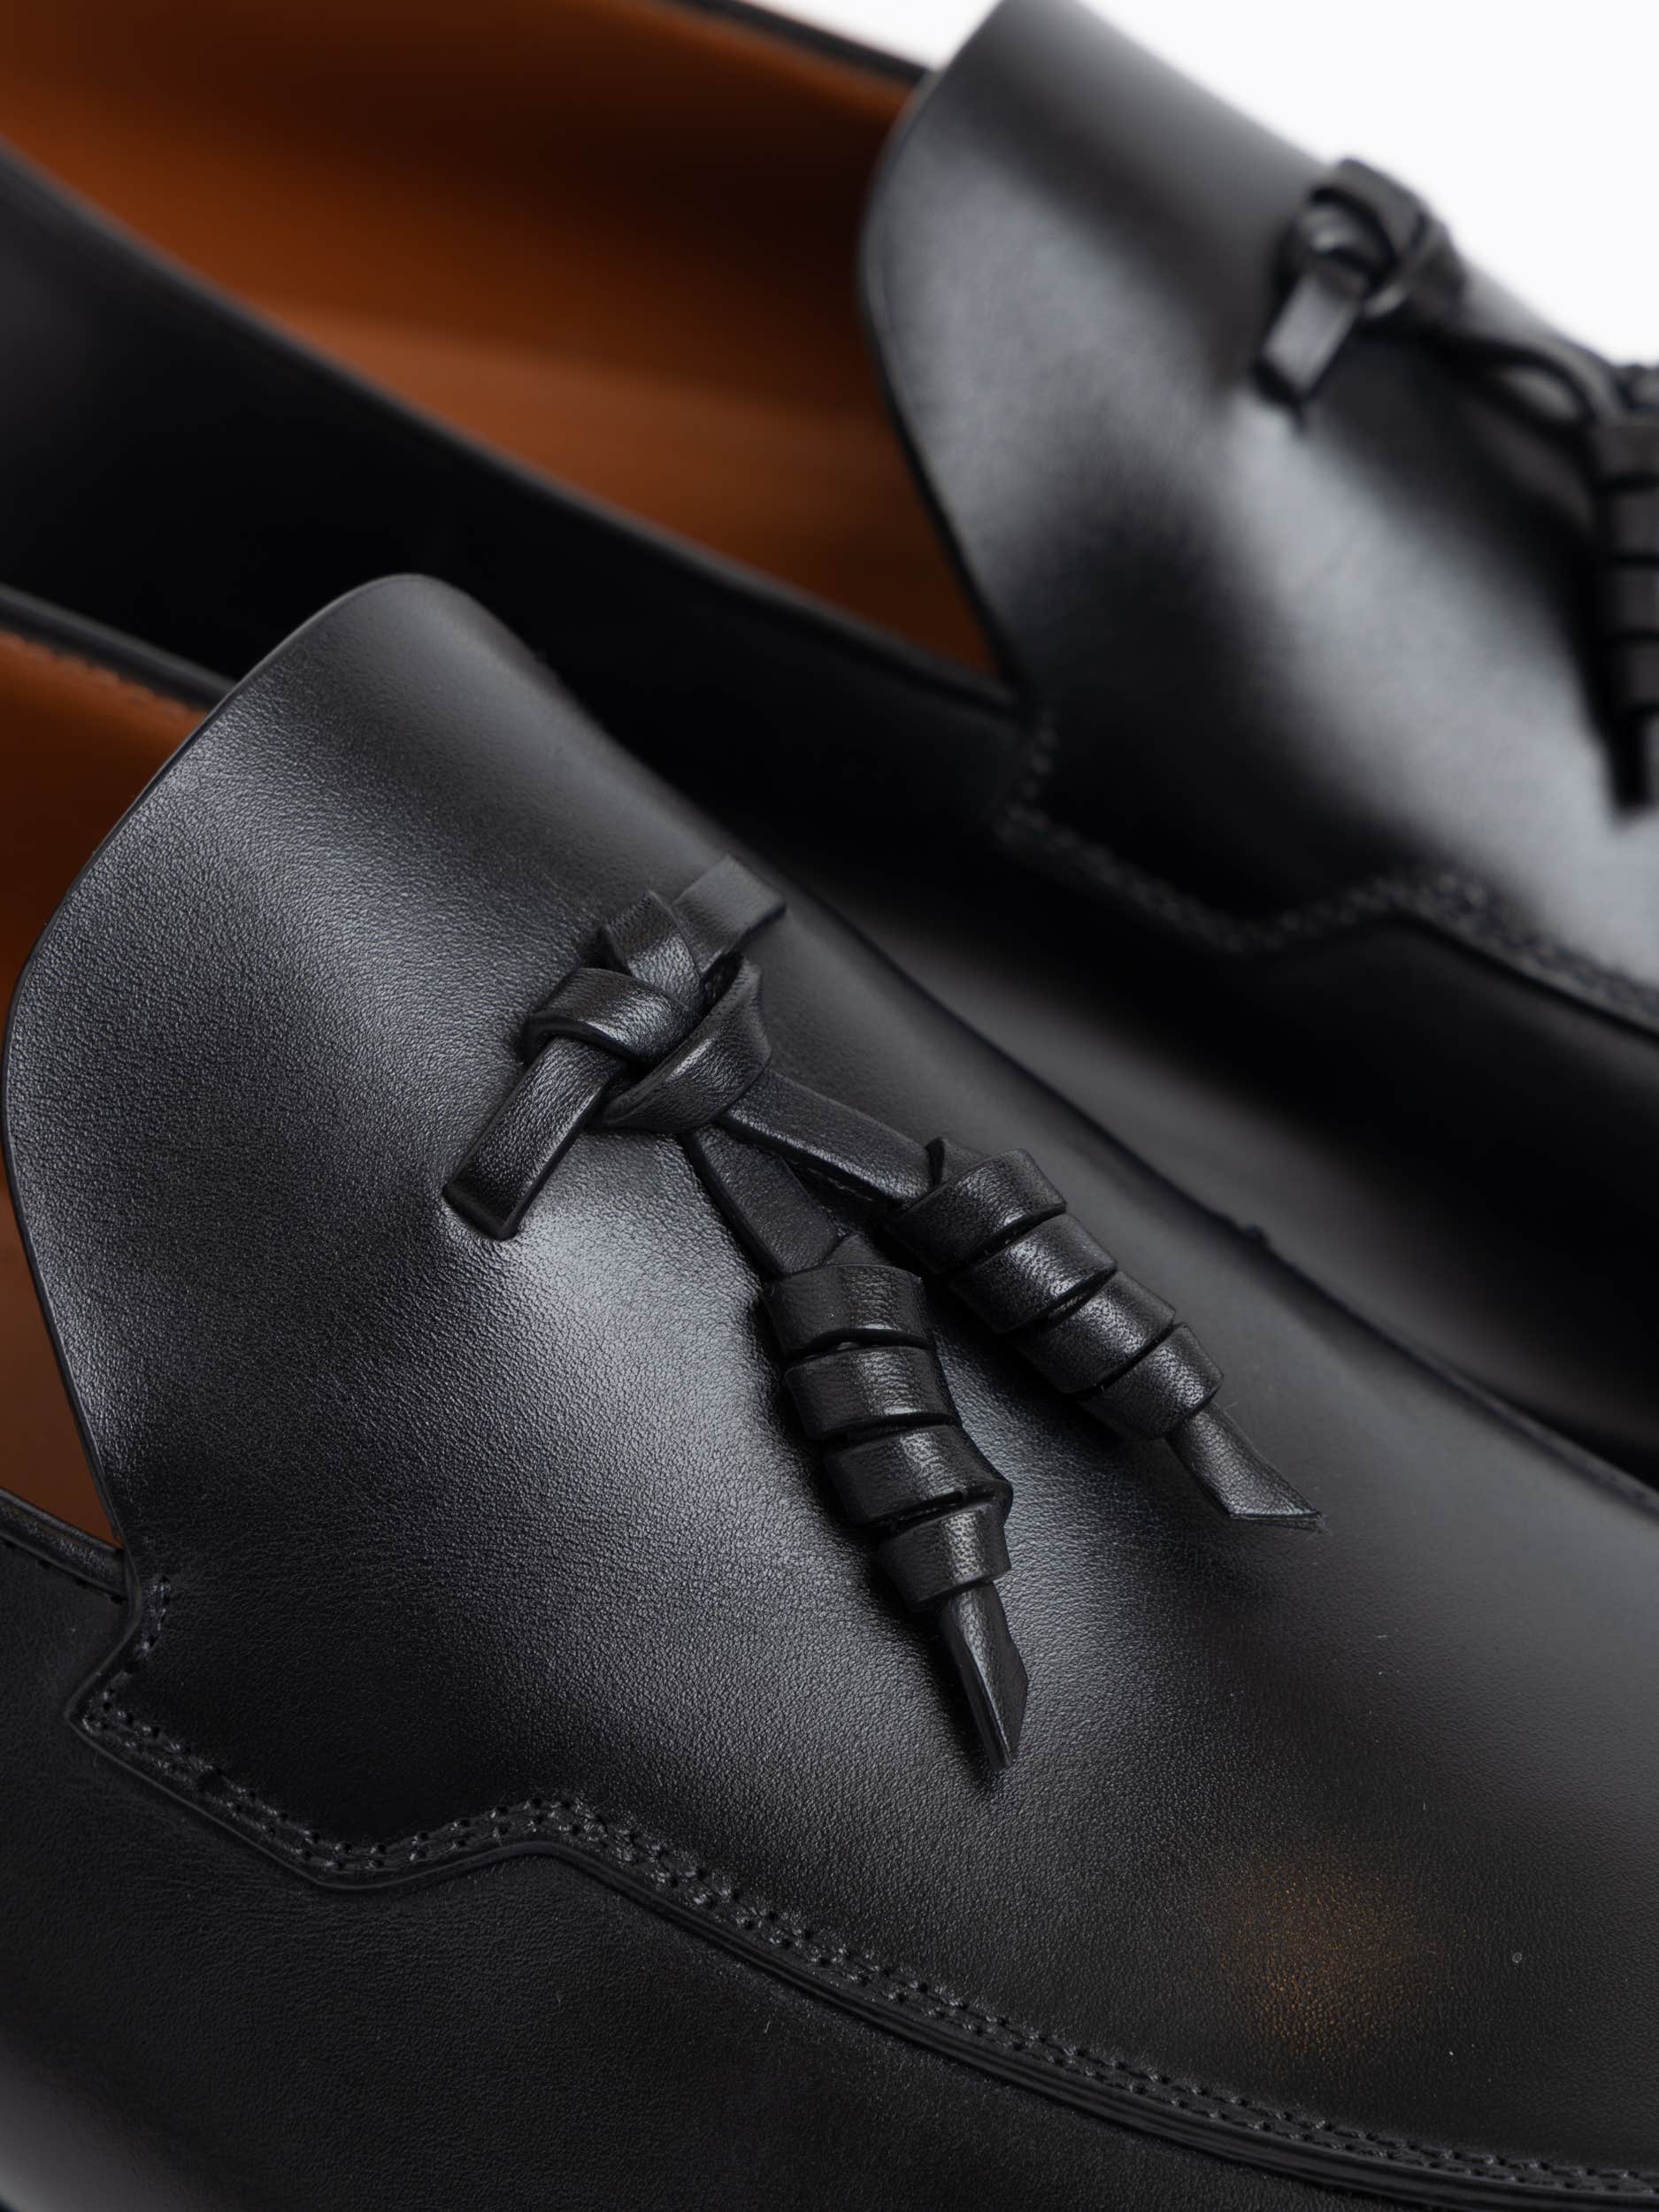 Black Leather Torino Loafers